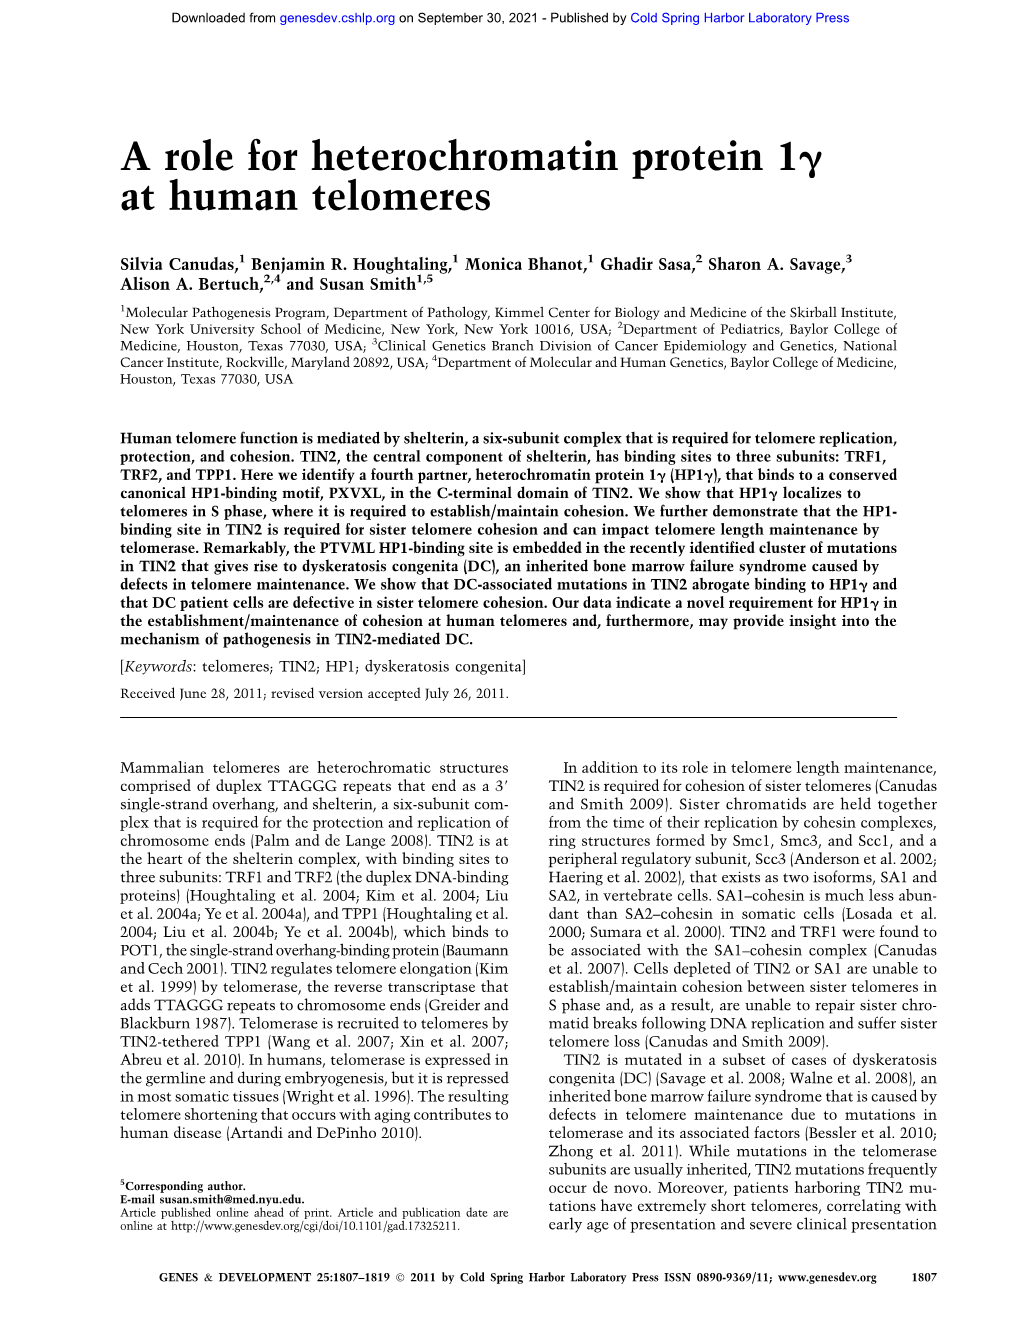 A Role for Heterochromatin Protein 1G at Human Telomeres